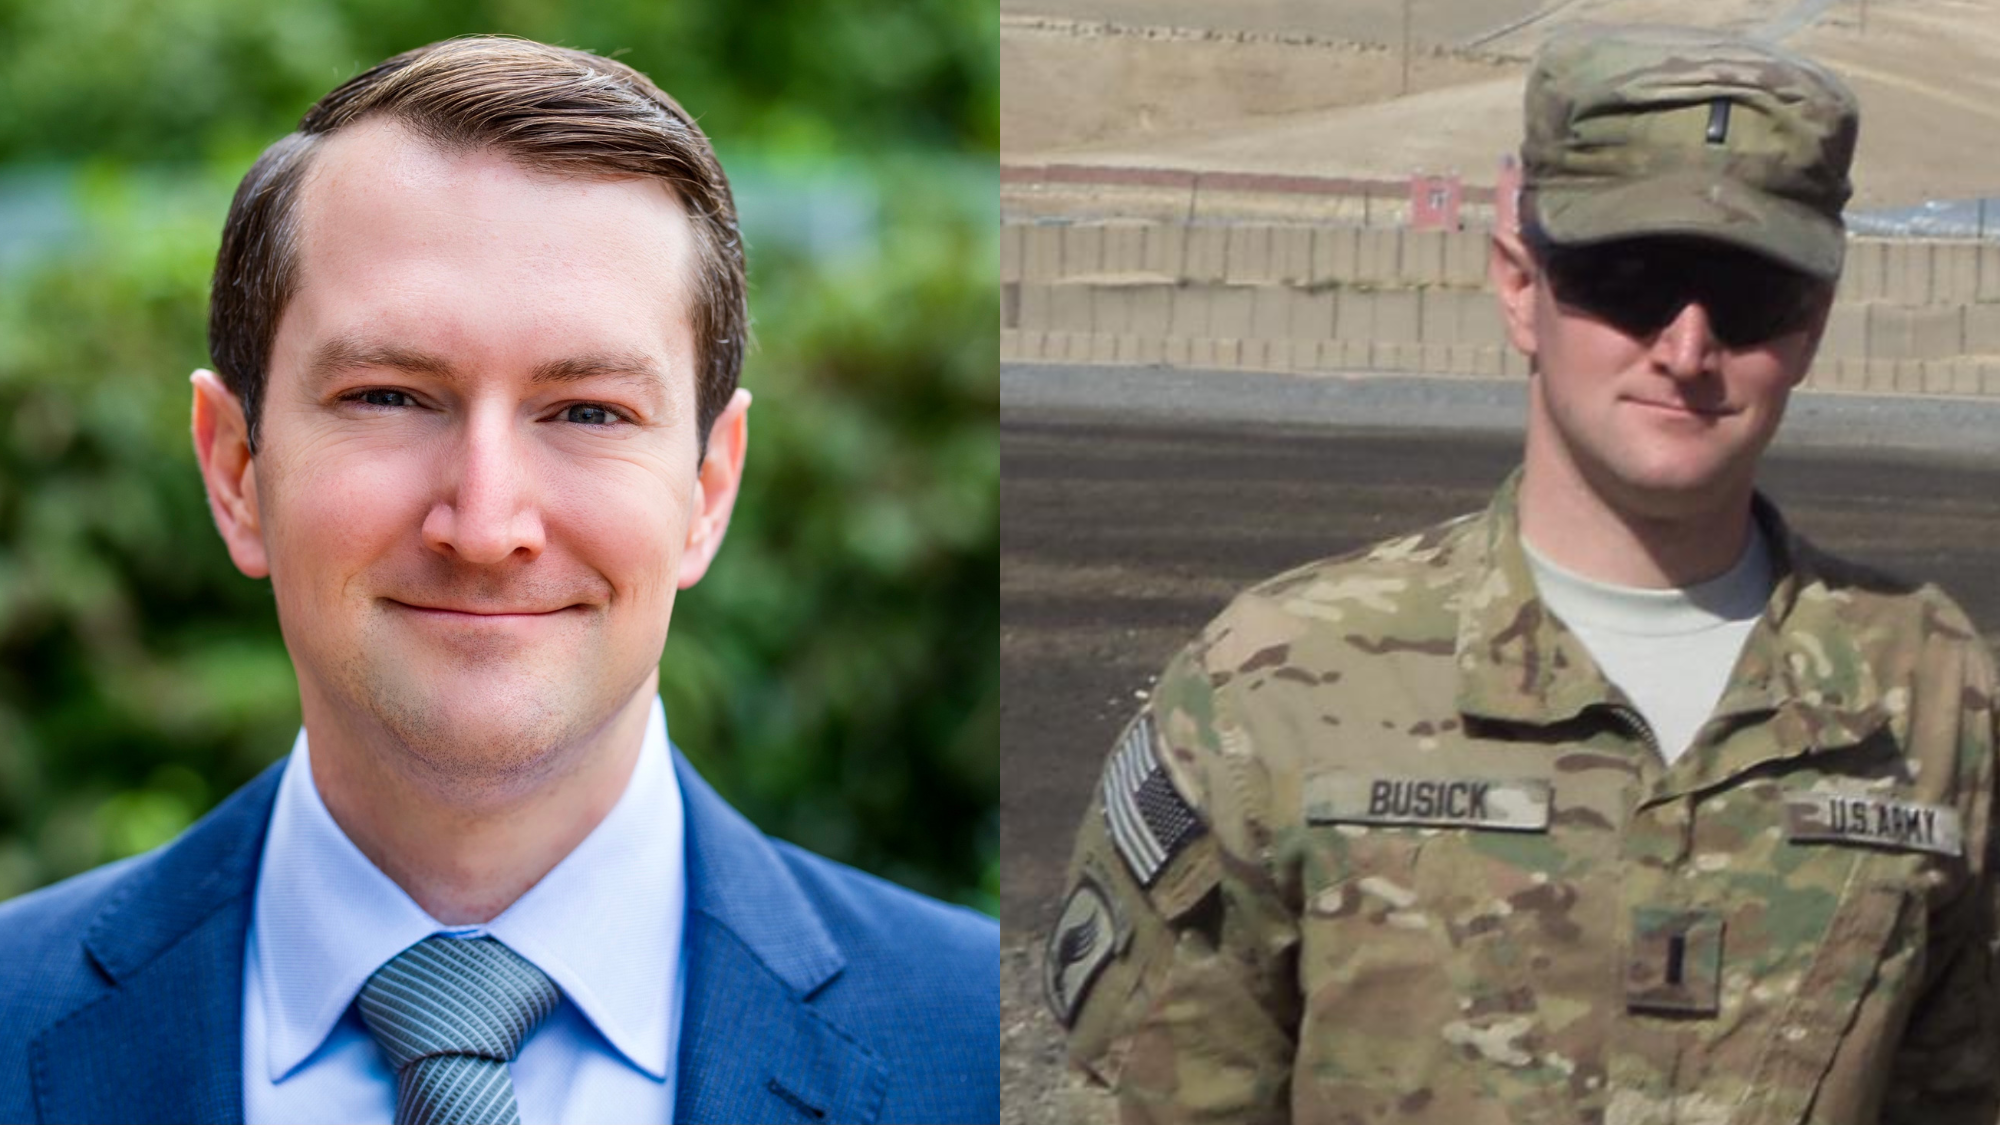 Philip Busick (MBA'23) on the Decision To Pursue a Business Education After 10 Years as an Active-Duty Army Service Member